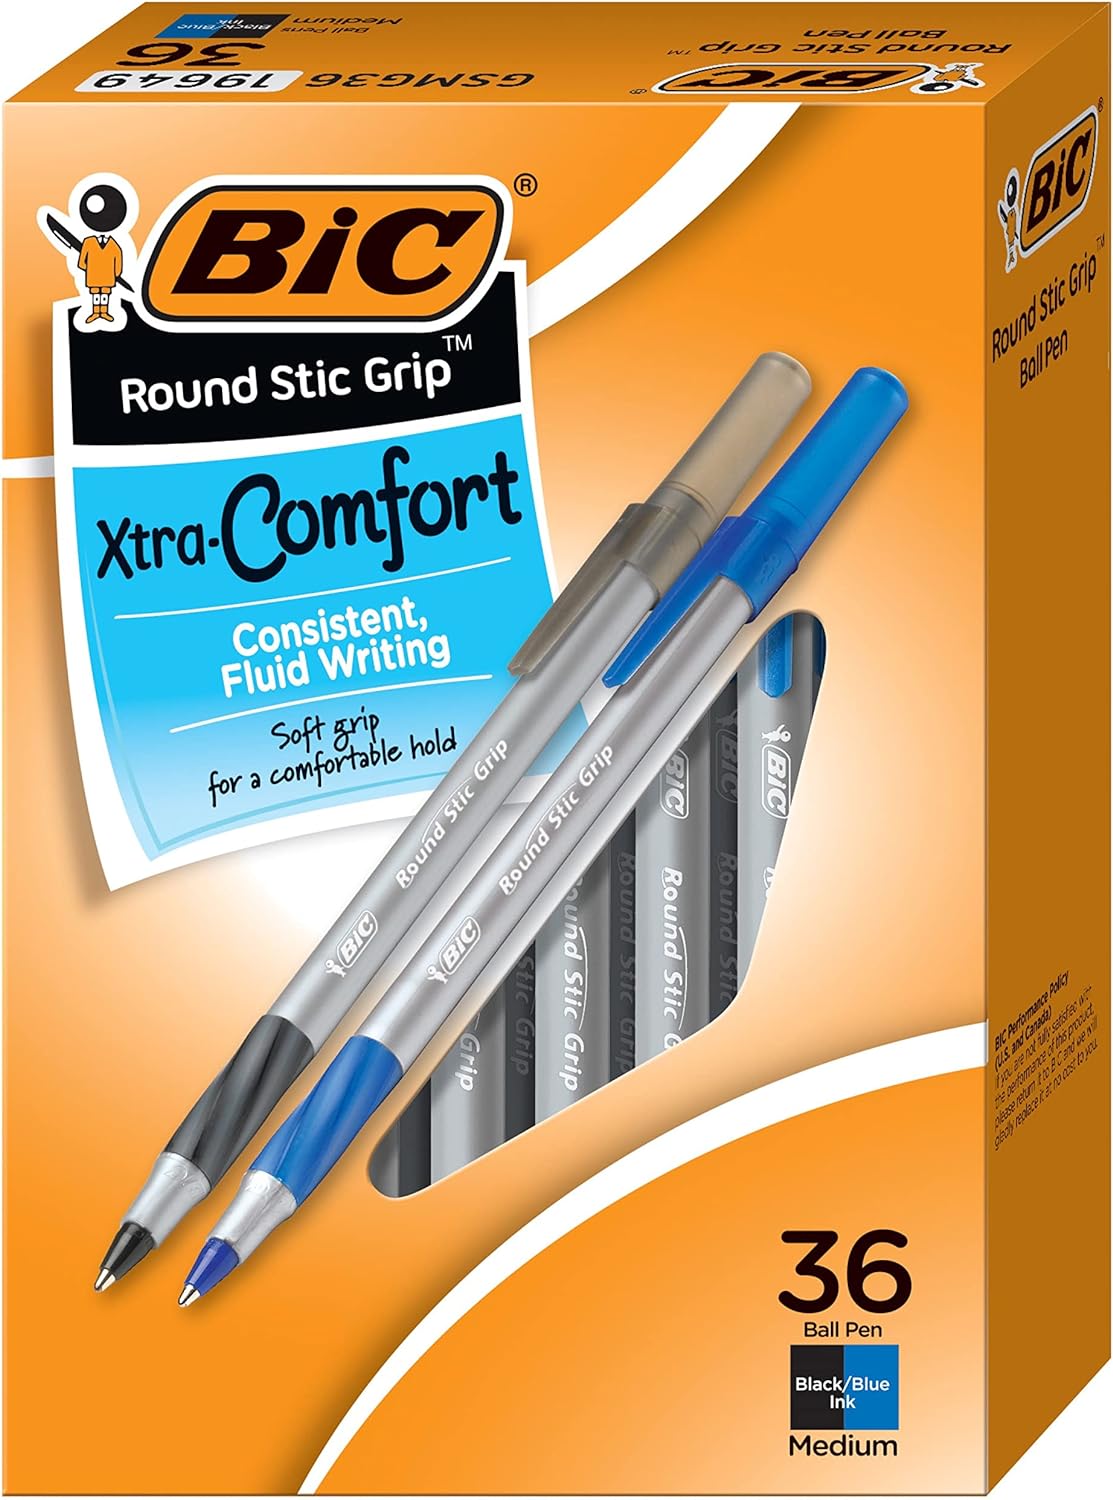 BIC Round Stic Grip Xtra Comfort Assorted Colors Ballpoint Pens, Medium Point (1.2mm), 36-Count Pack, Perfect for Writing with Superb Control